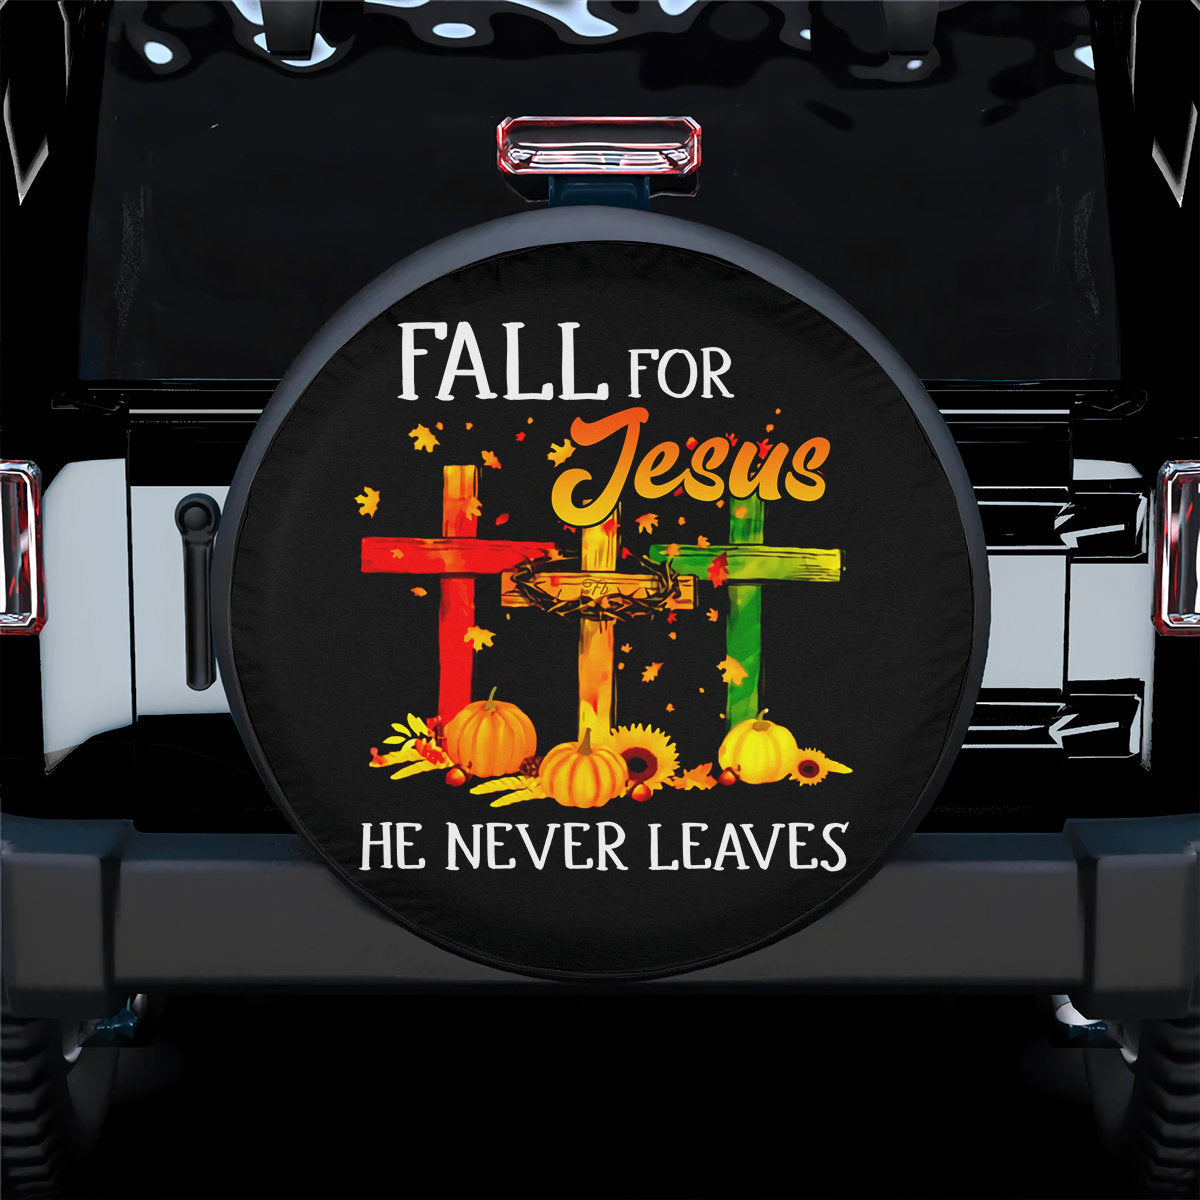 Fall For Jesus He Never Leaves - Spare Tire Cover - Cross Autumn Wheel Cover Autumn Pumpkin Sunflower